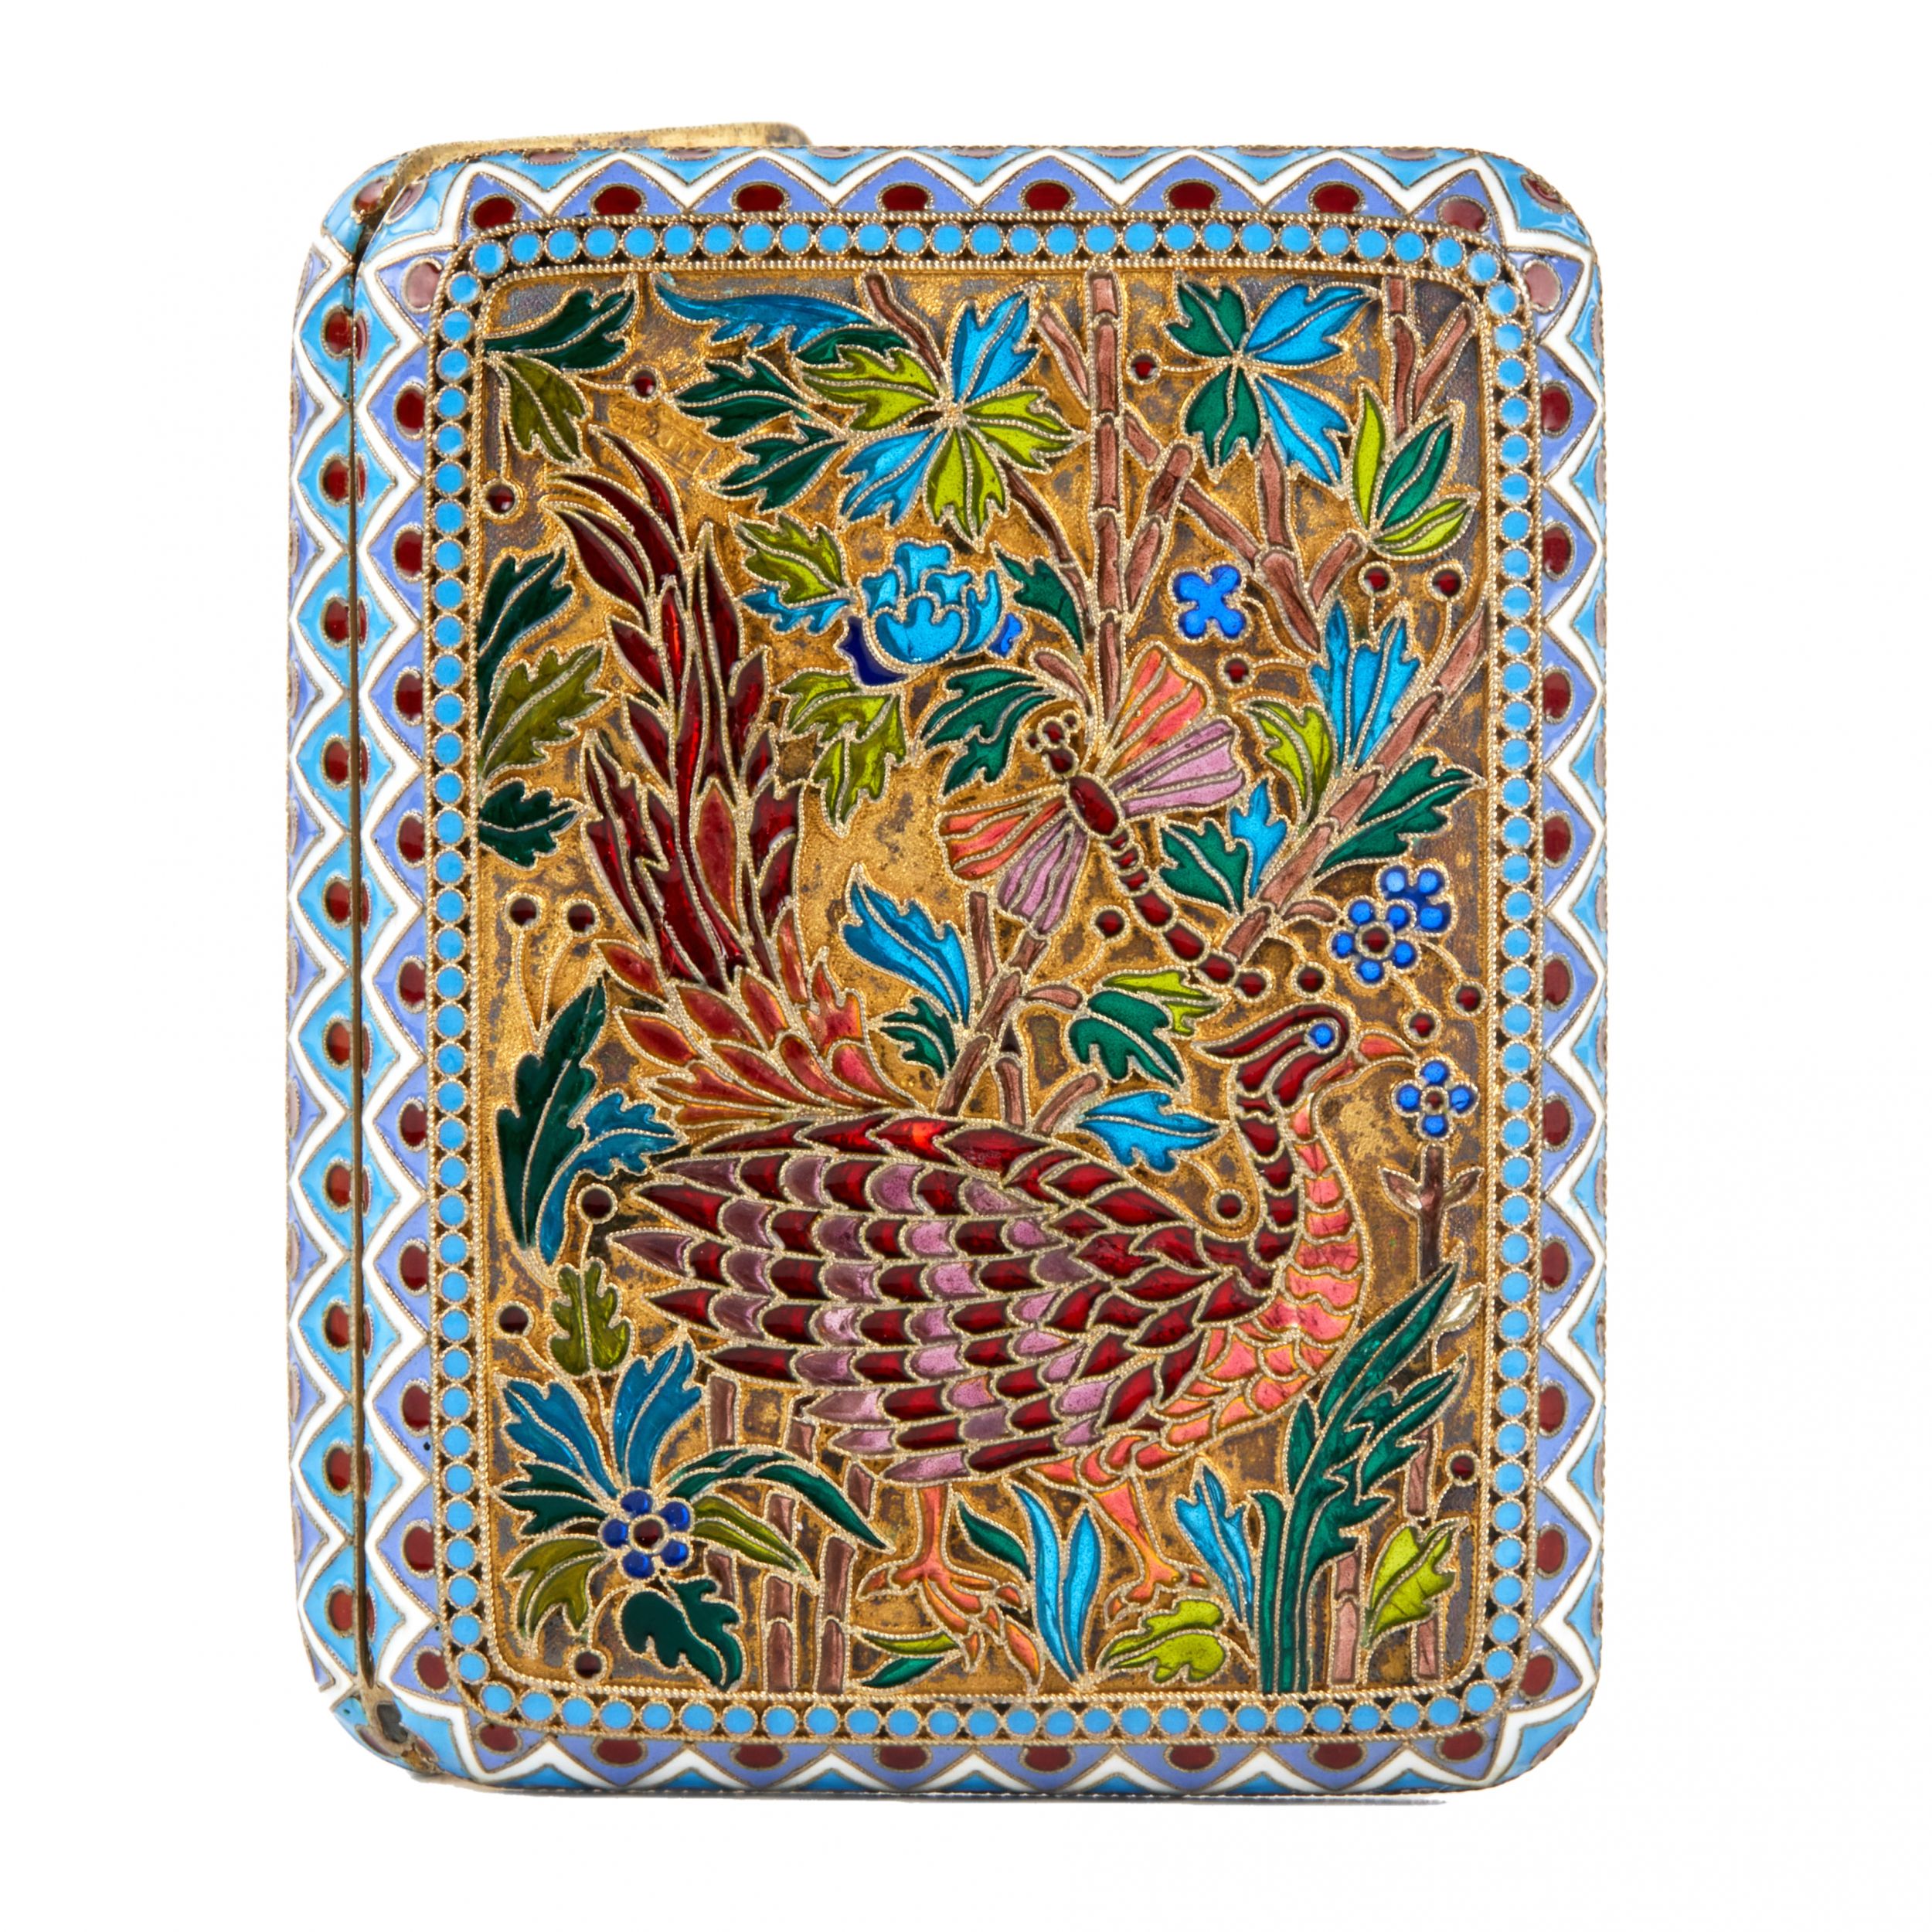 Silver cigarette case of Ovchinnikovs stained glass enamel. - Image 2 of 9